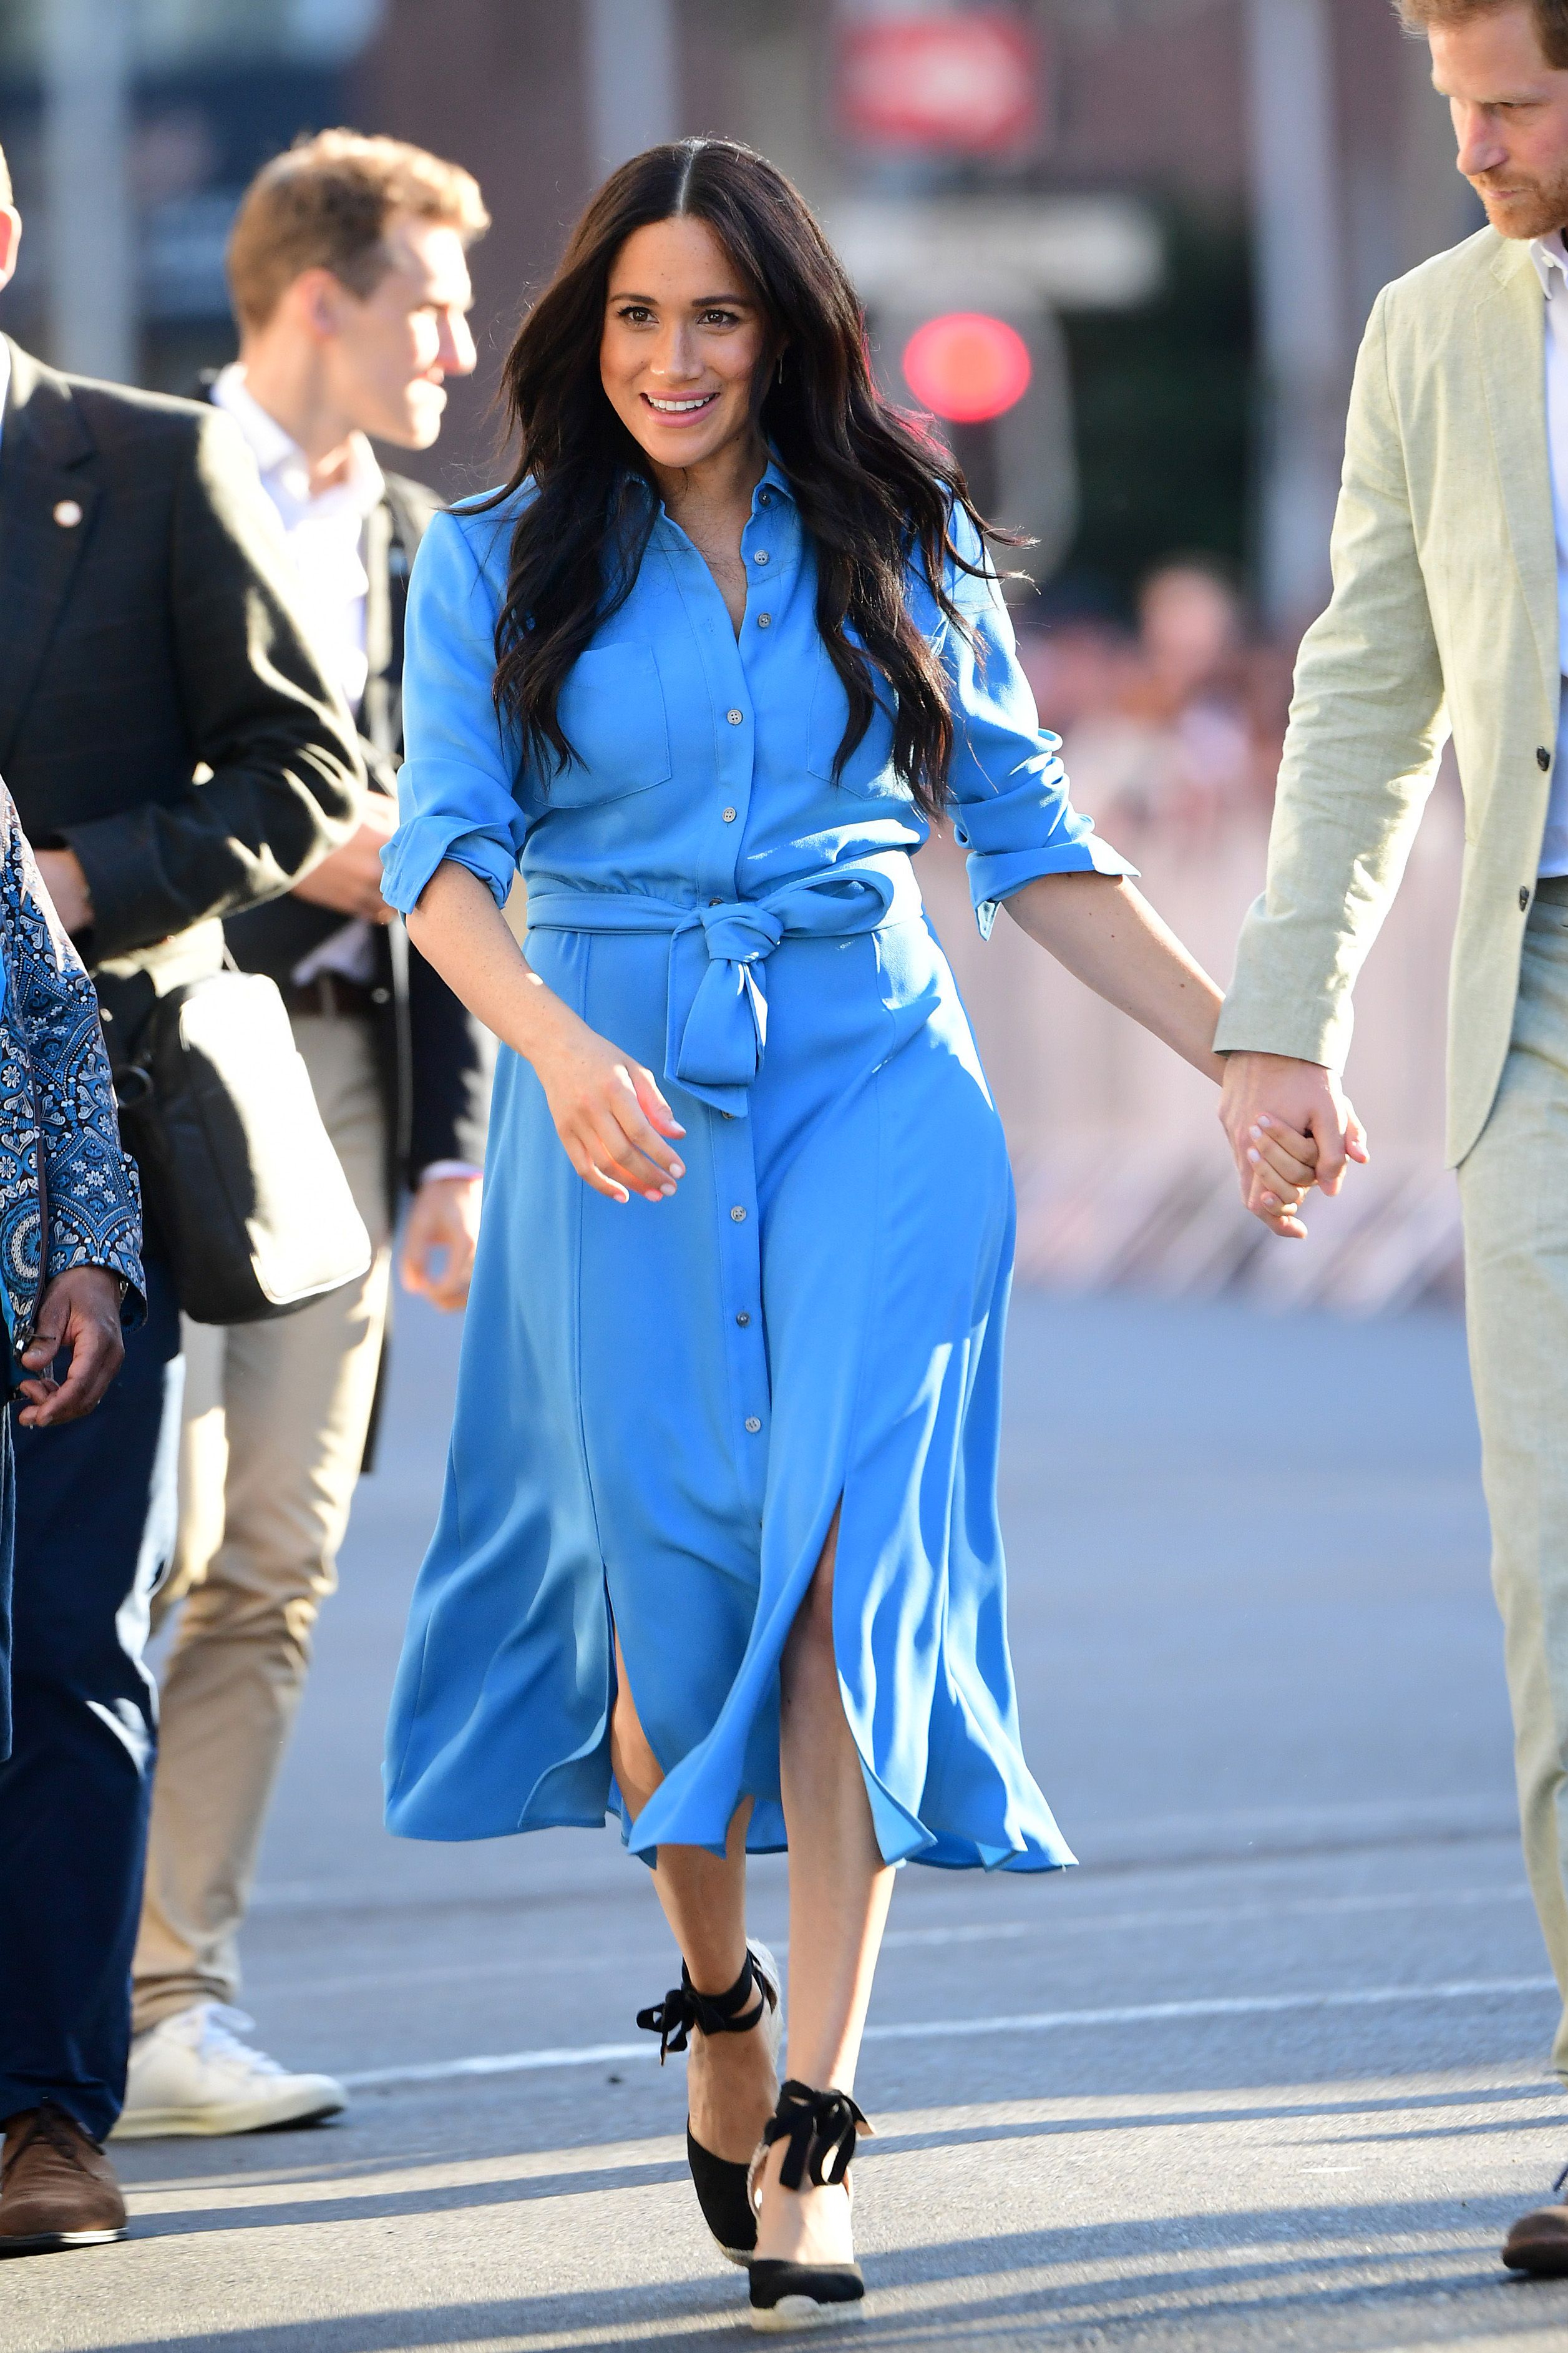 Castañer wedges are the summer staple loved by royals and celebs